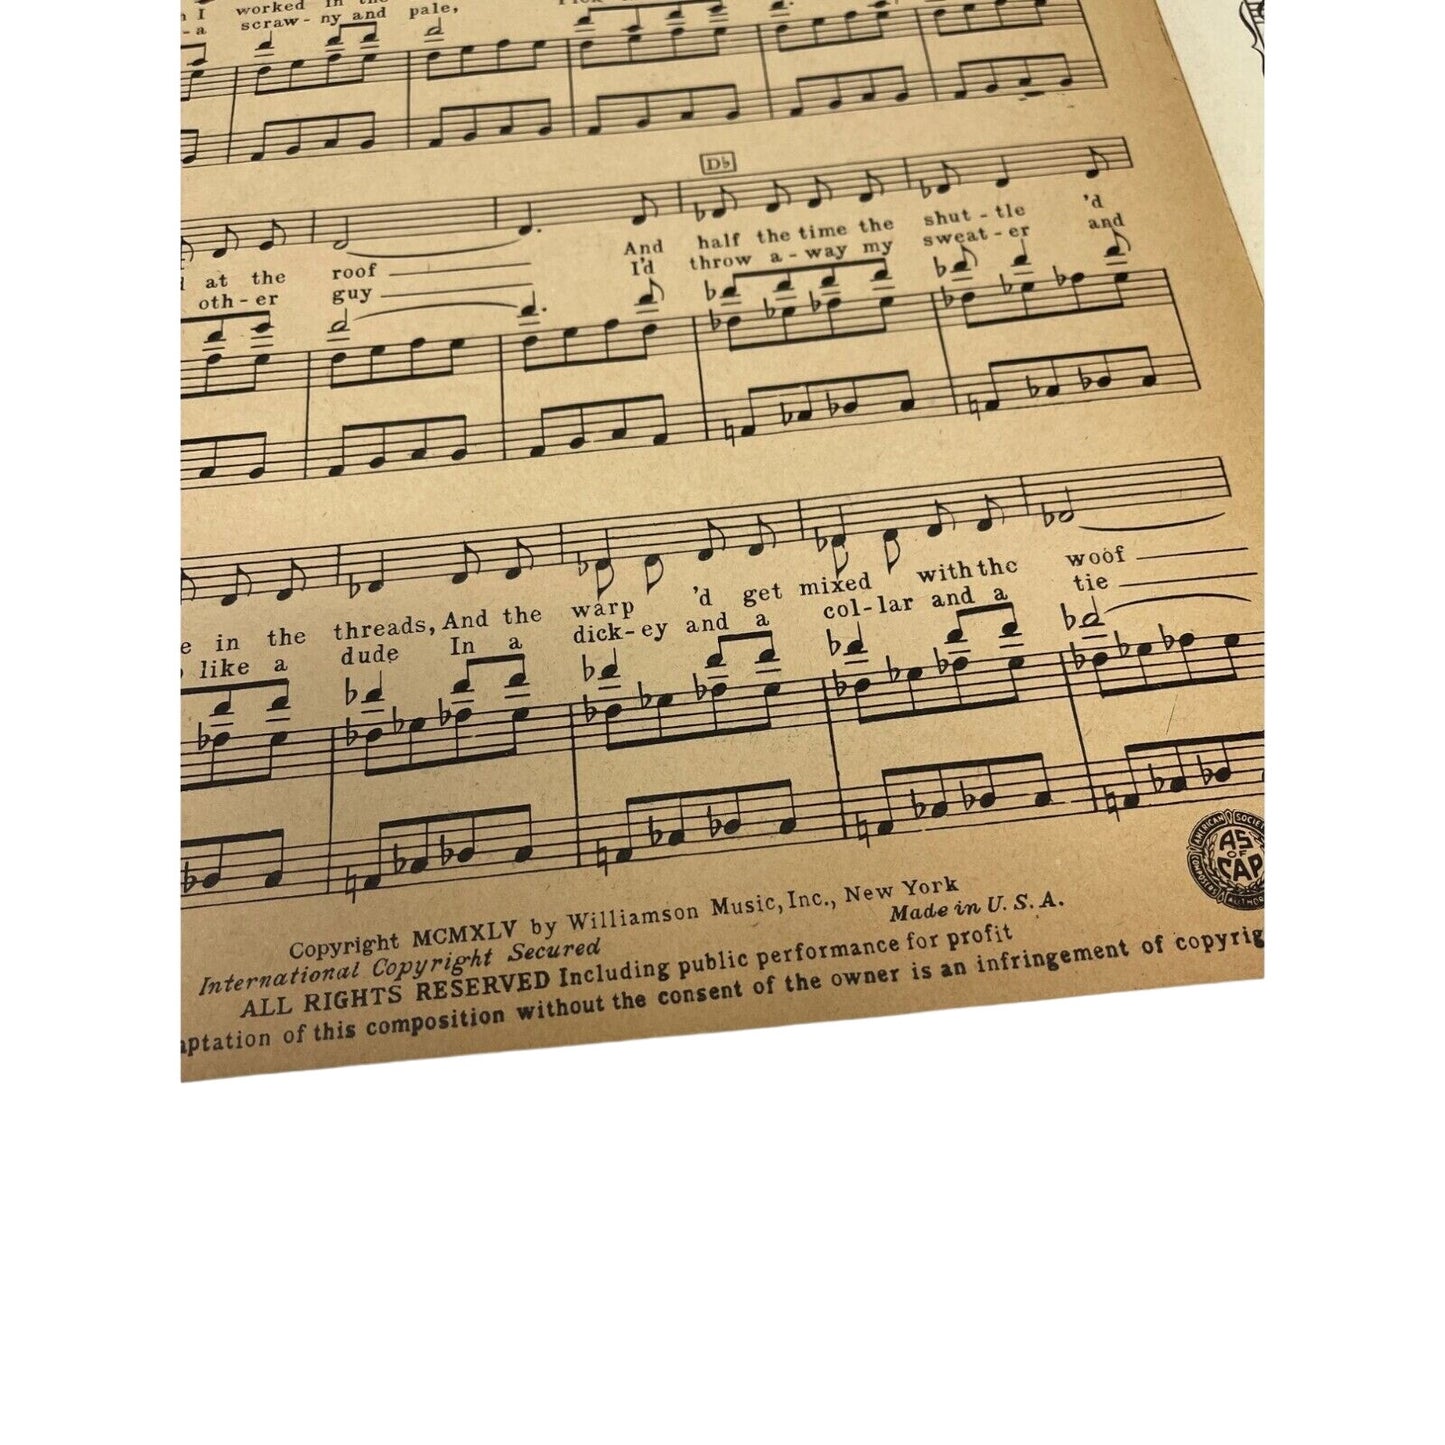 1945 If I Loved You Sheet Music From Carousel Rodgers and Hammerstein